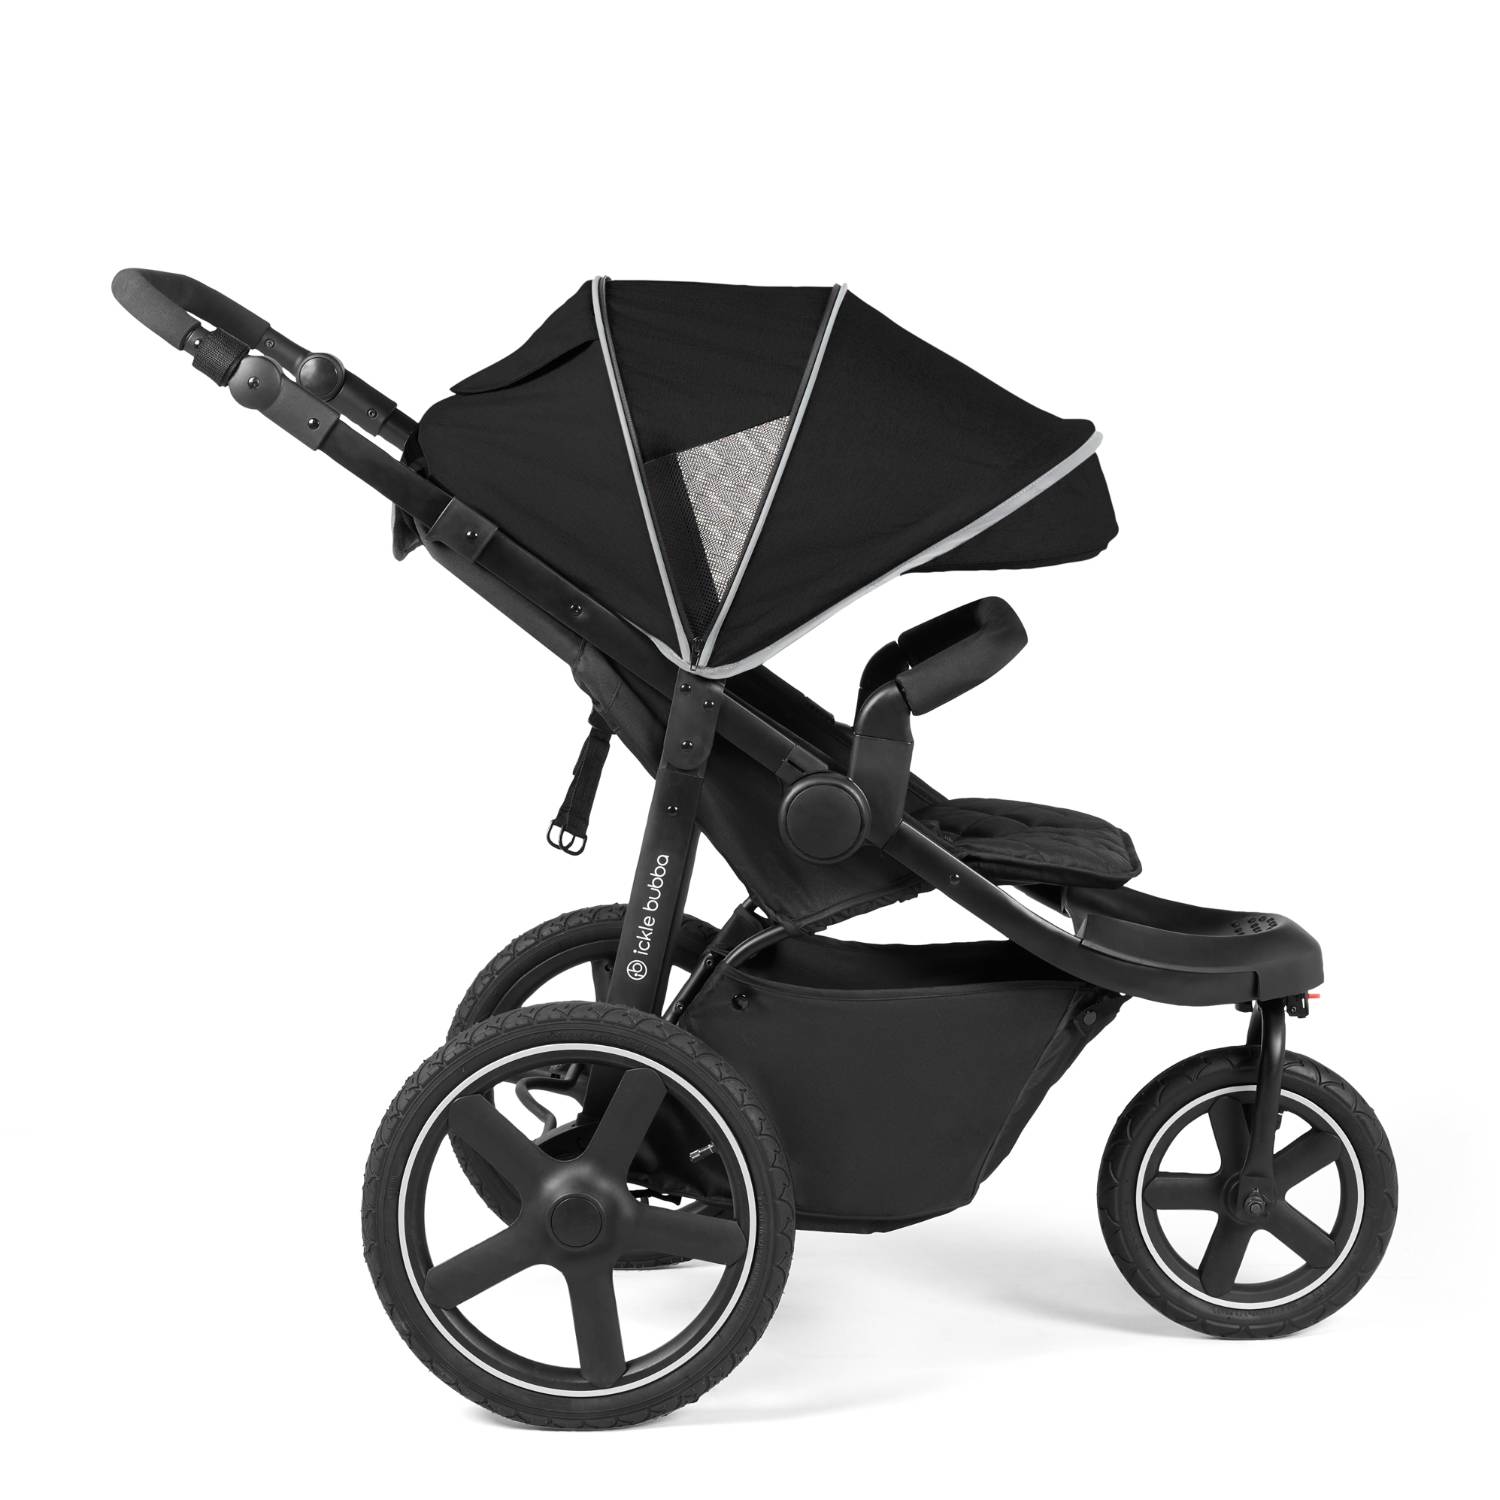 Side view of Ickle Bubba Venus Max Jogger Stroller in Black colour with expanded hood